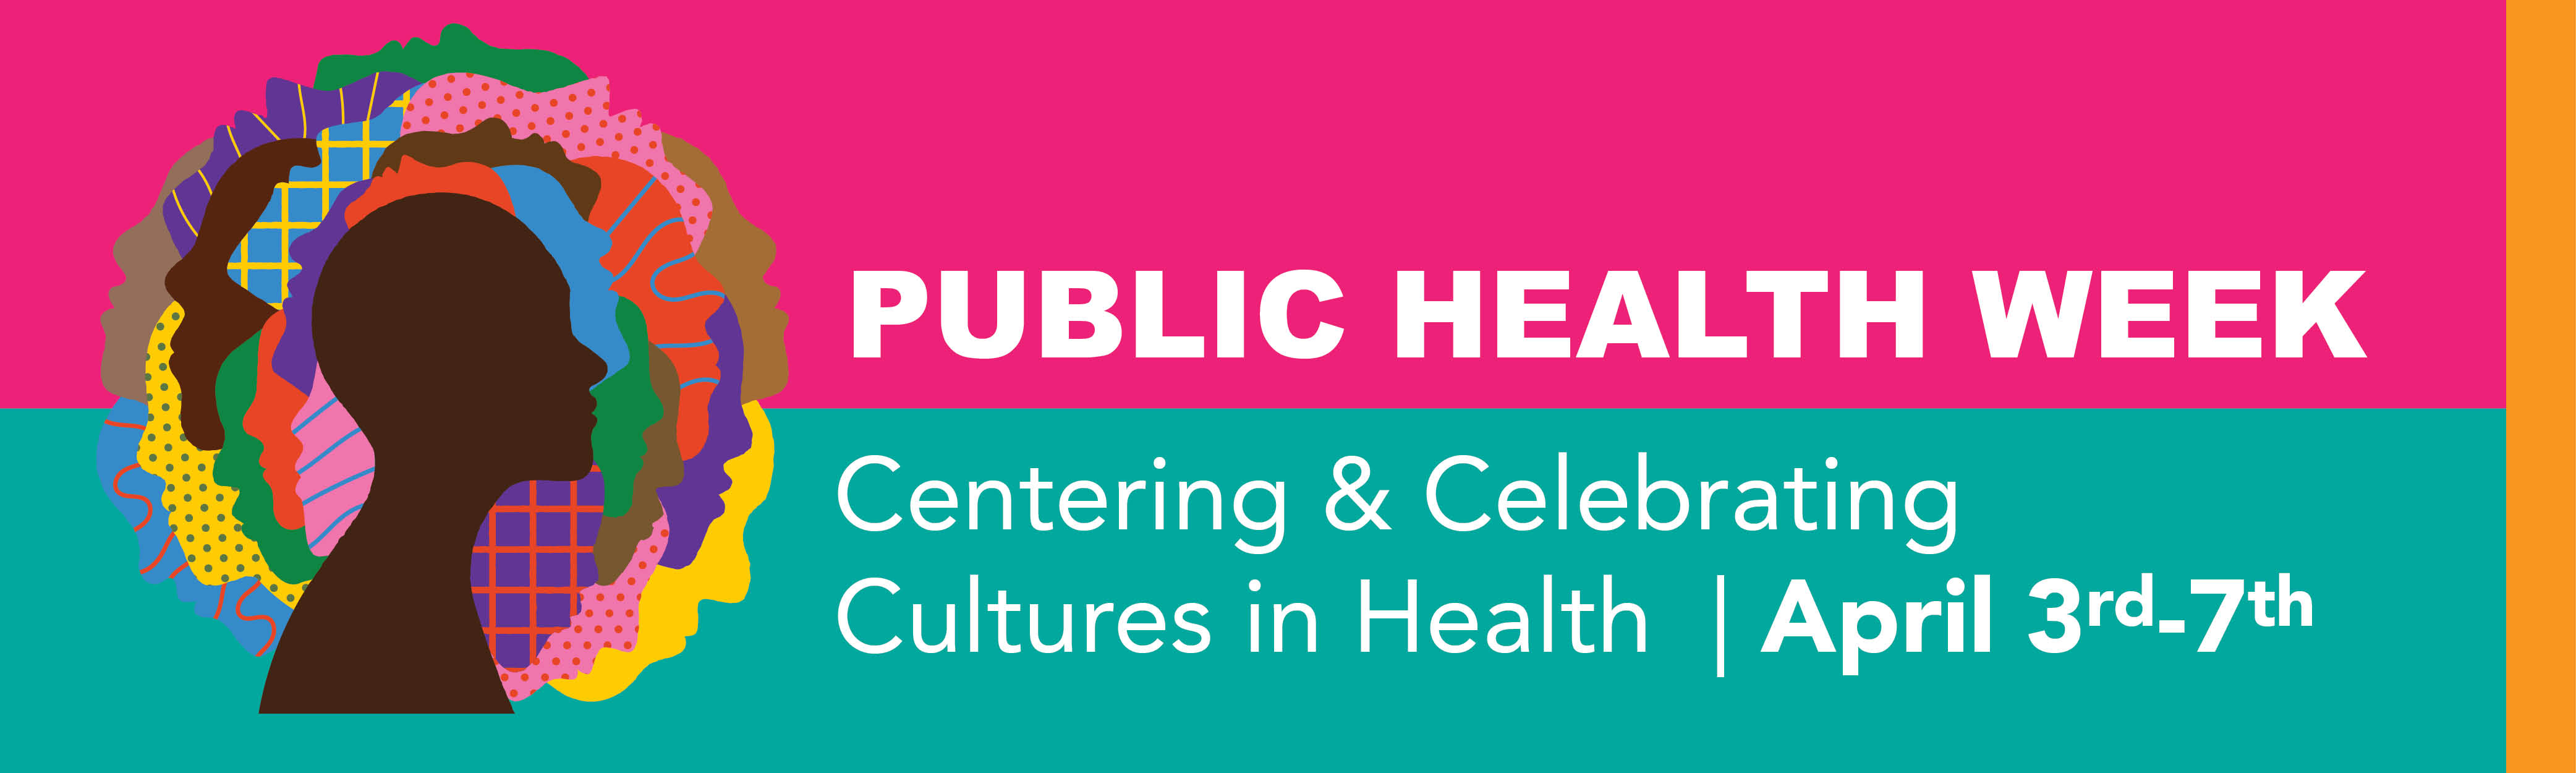 Public Health Week is where you are